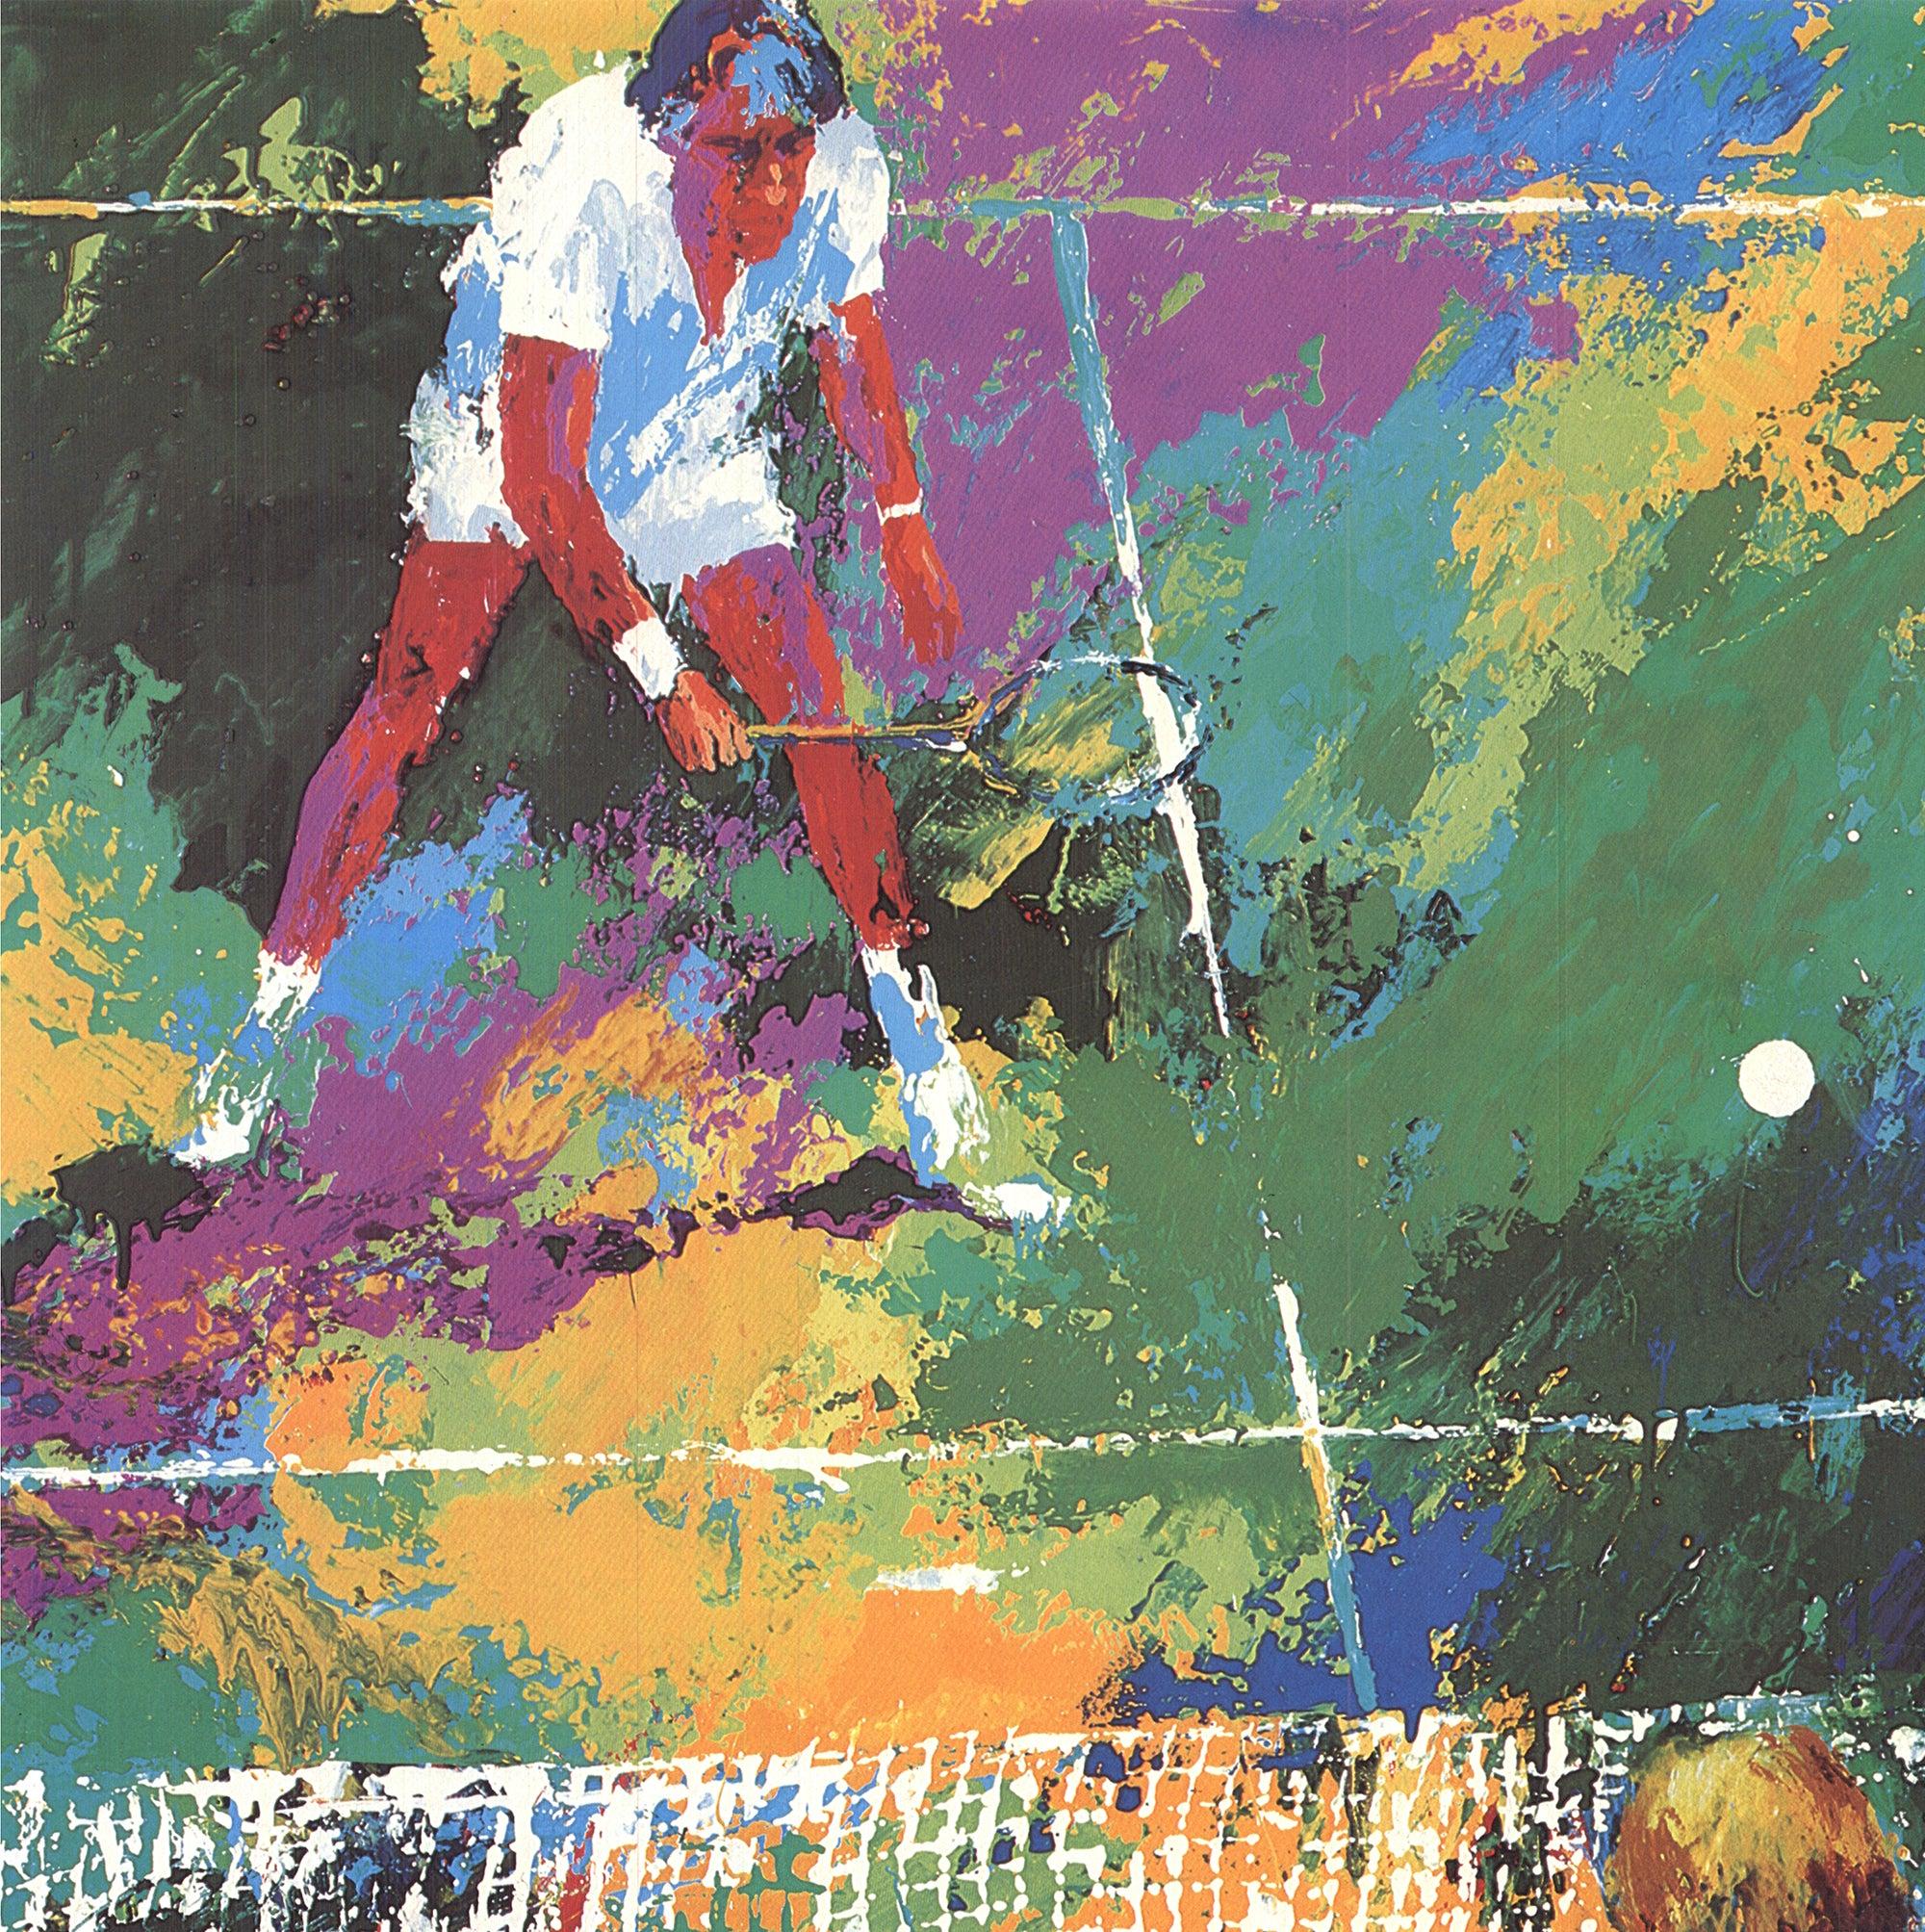 LeRoy Neiman 'Mixed Doubles' 1977- Offset Lithograph For Sale 1